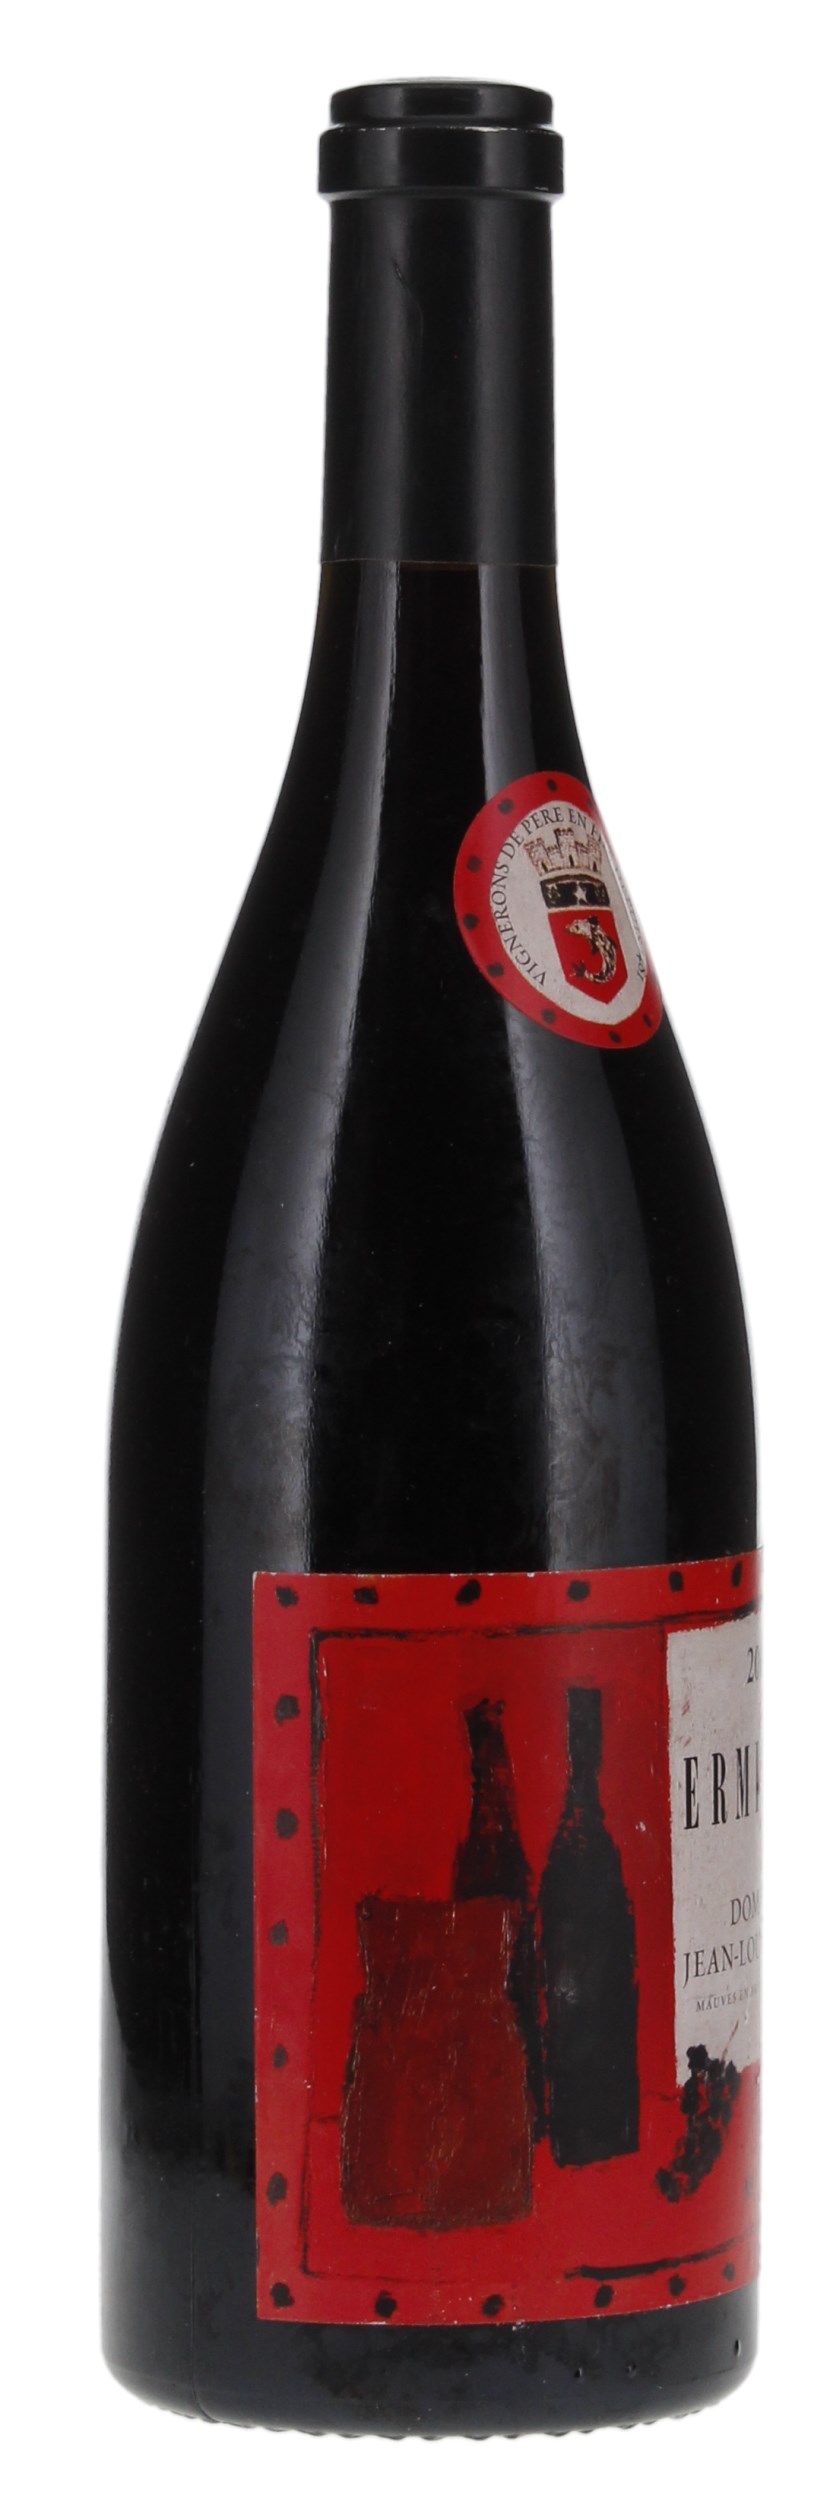 2009 Jean-Louis Chave Ermitage Cuvee Cathelin, 750ml